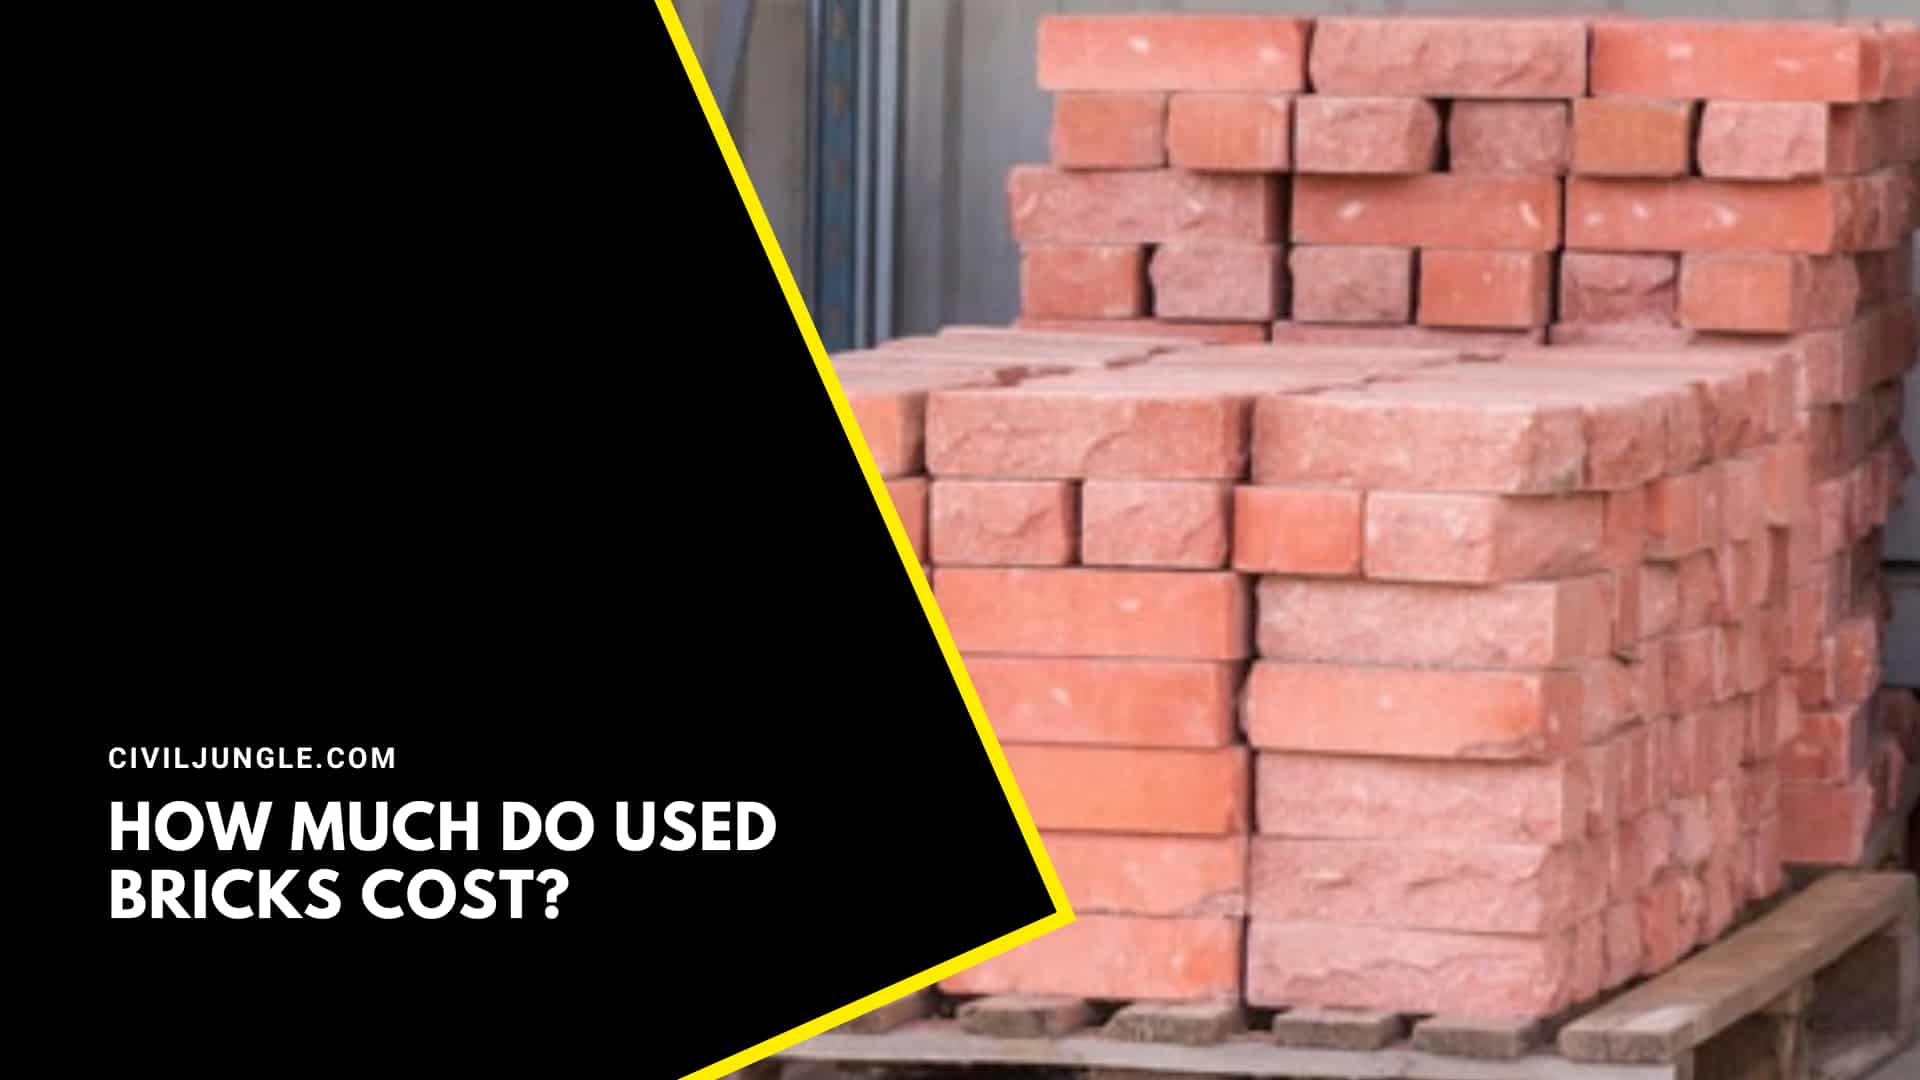 How Much Do Used Bricks Cost?